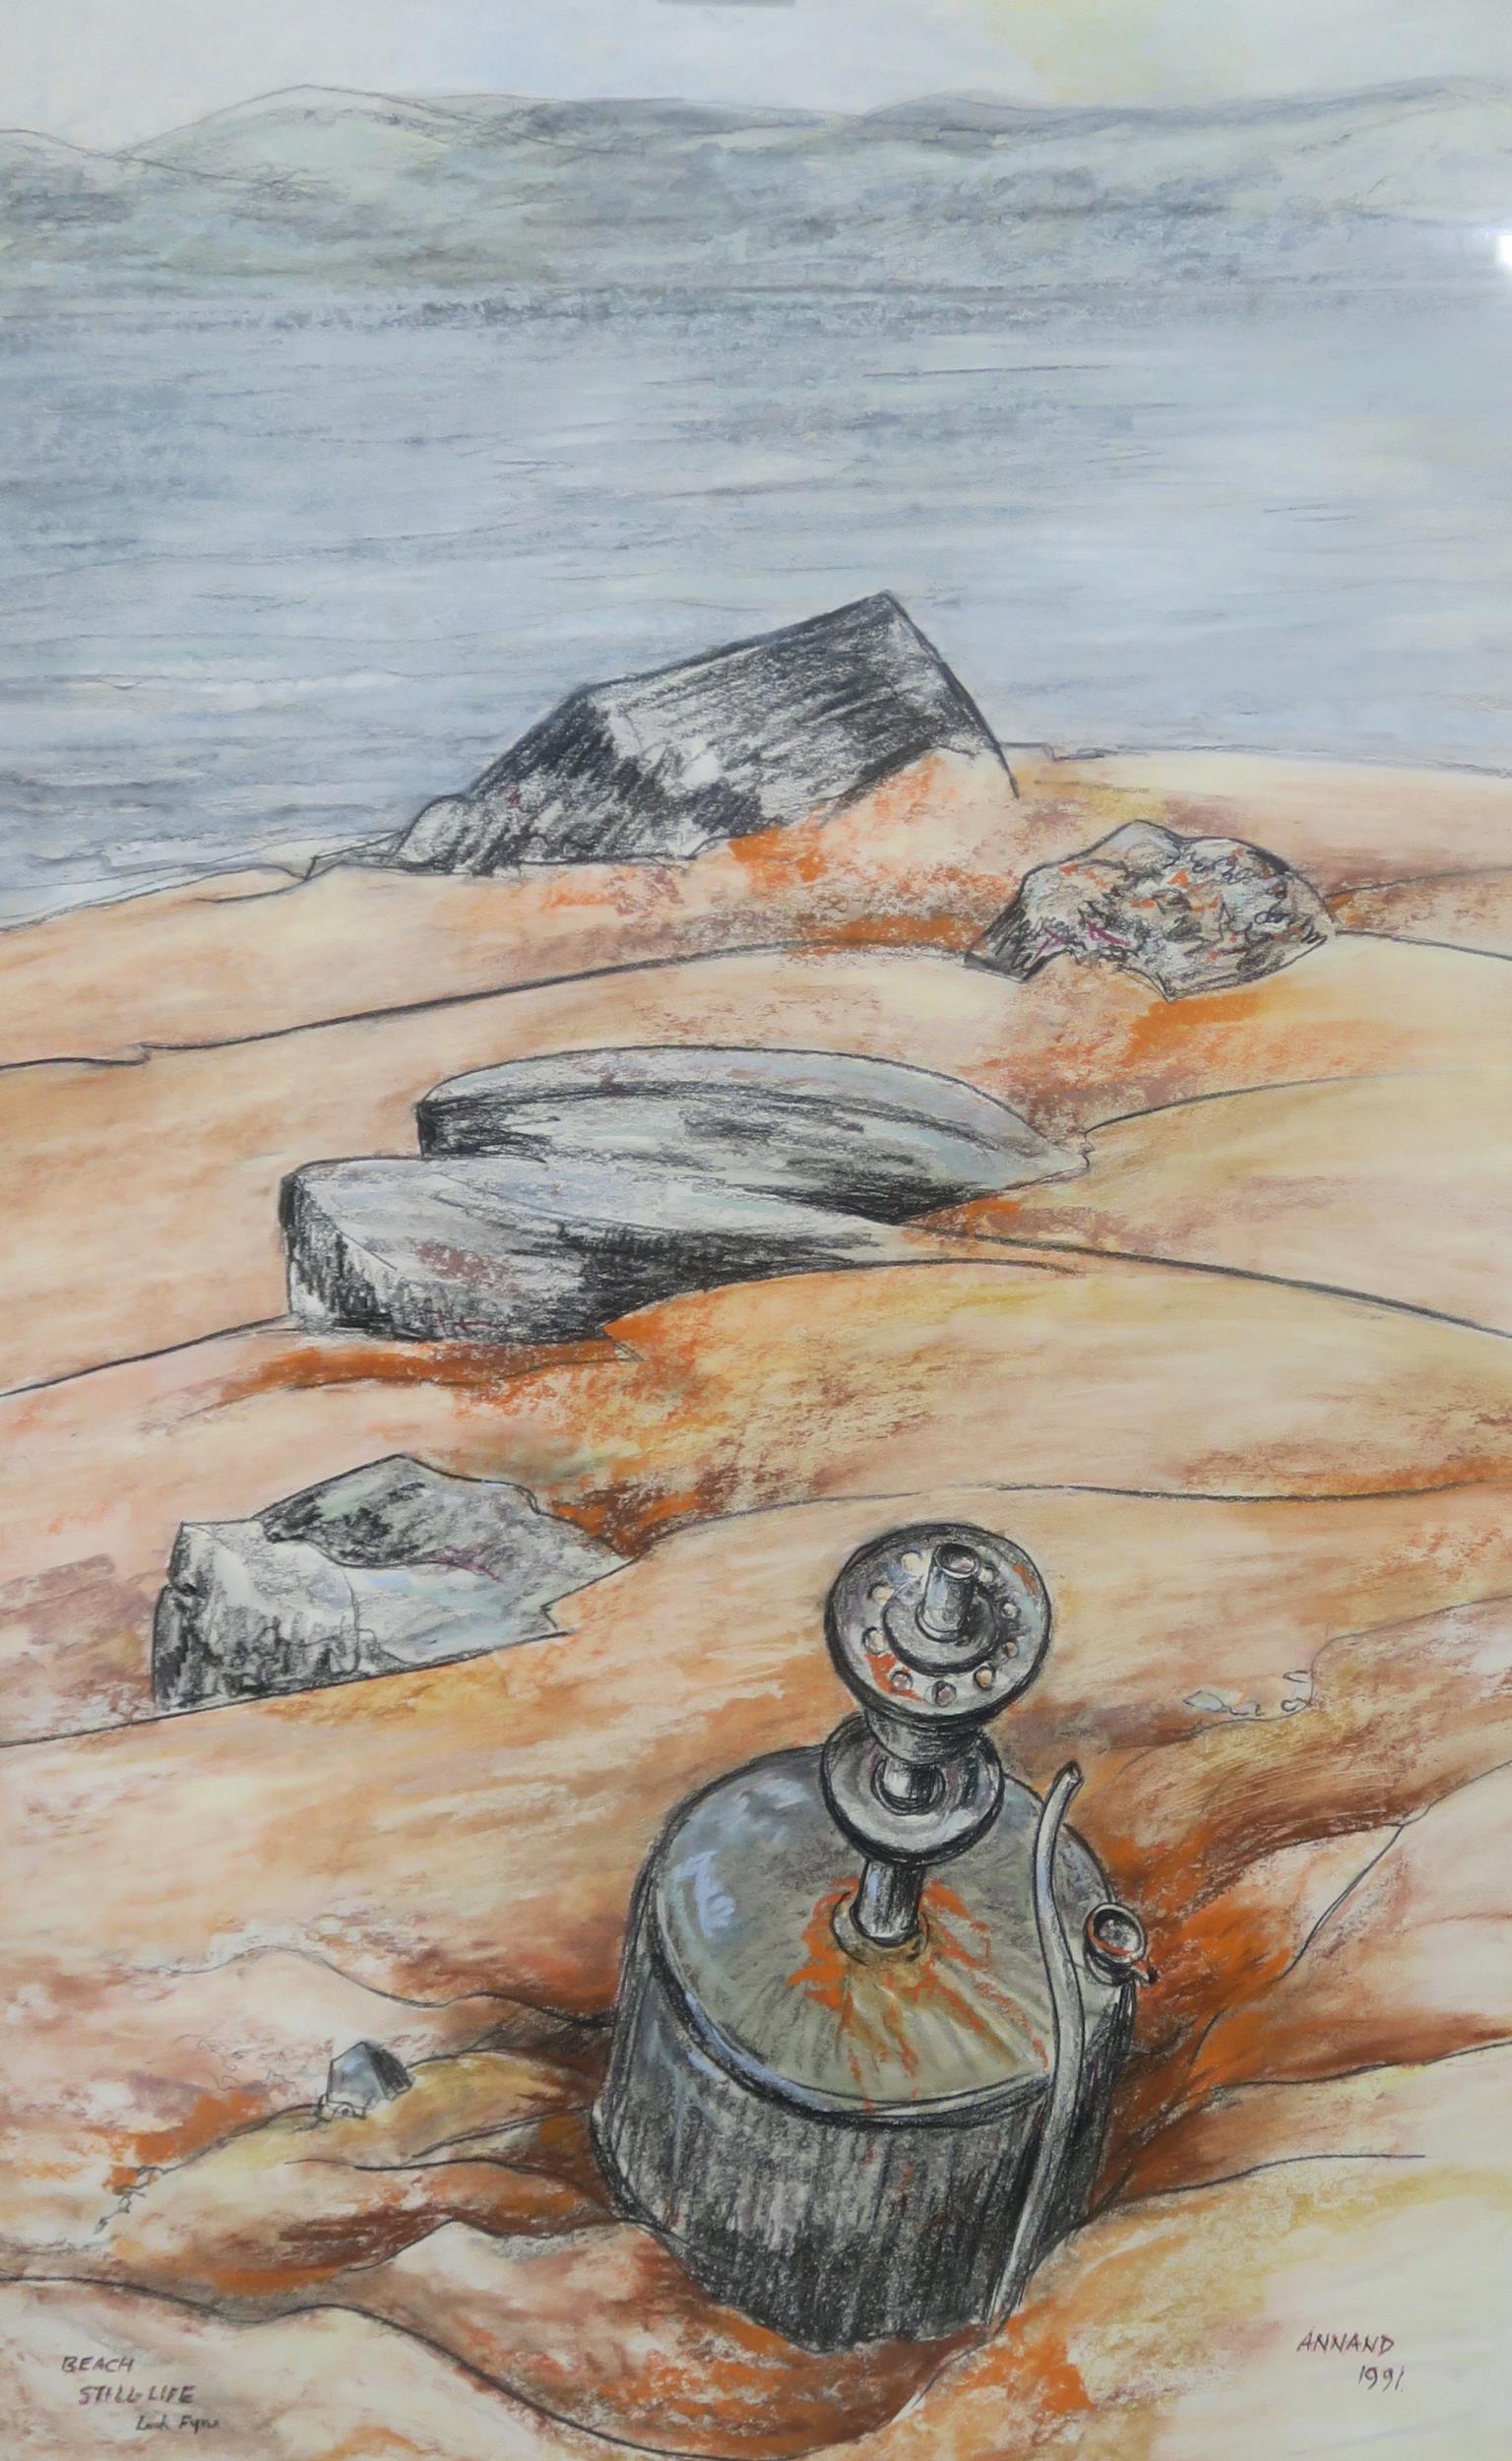 LOUISE GIBSON ANNAND MBE (1915-2012) STILL LIFE ON BEACH, LOCH FYNE Conte and pastel, signed lower